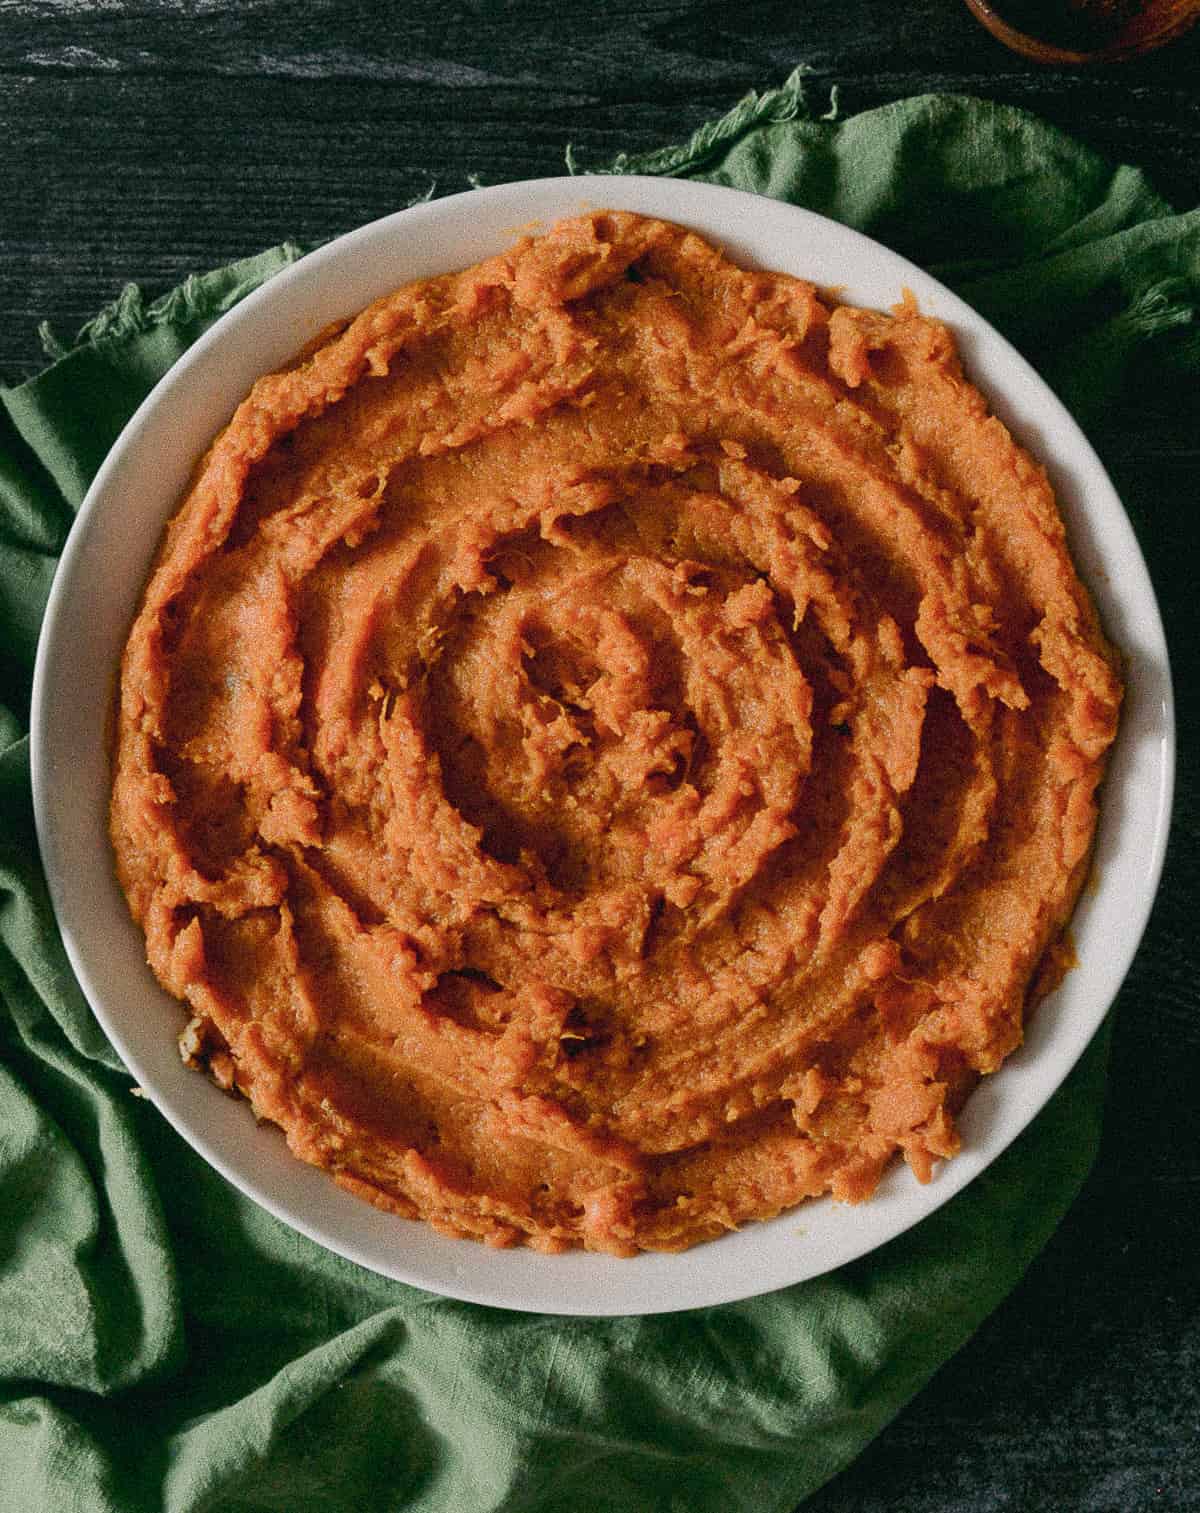 Mashed sweet potatoes in bowl.